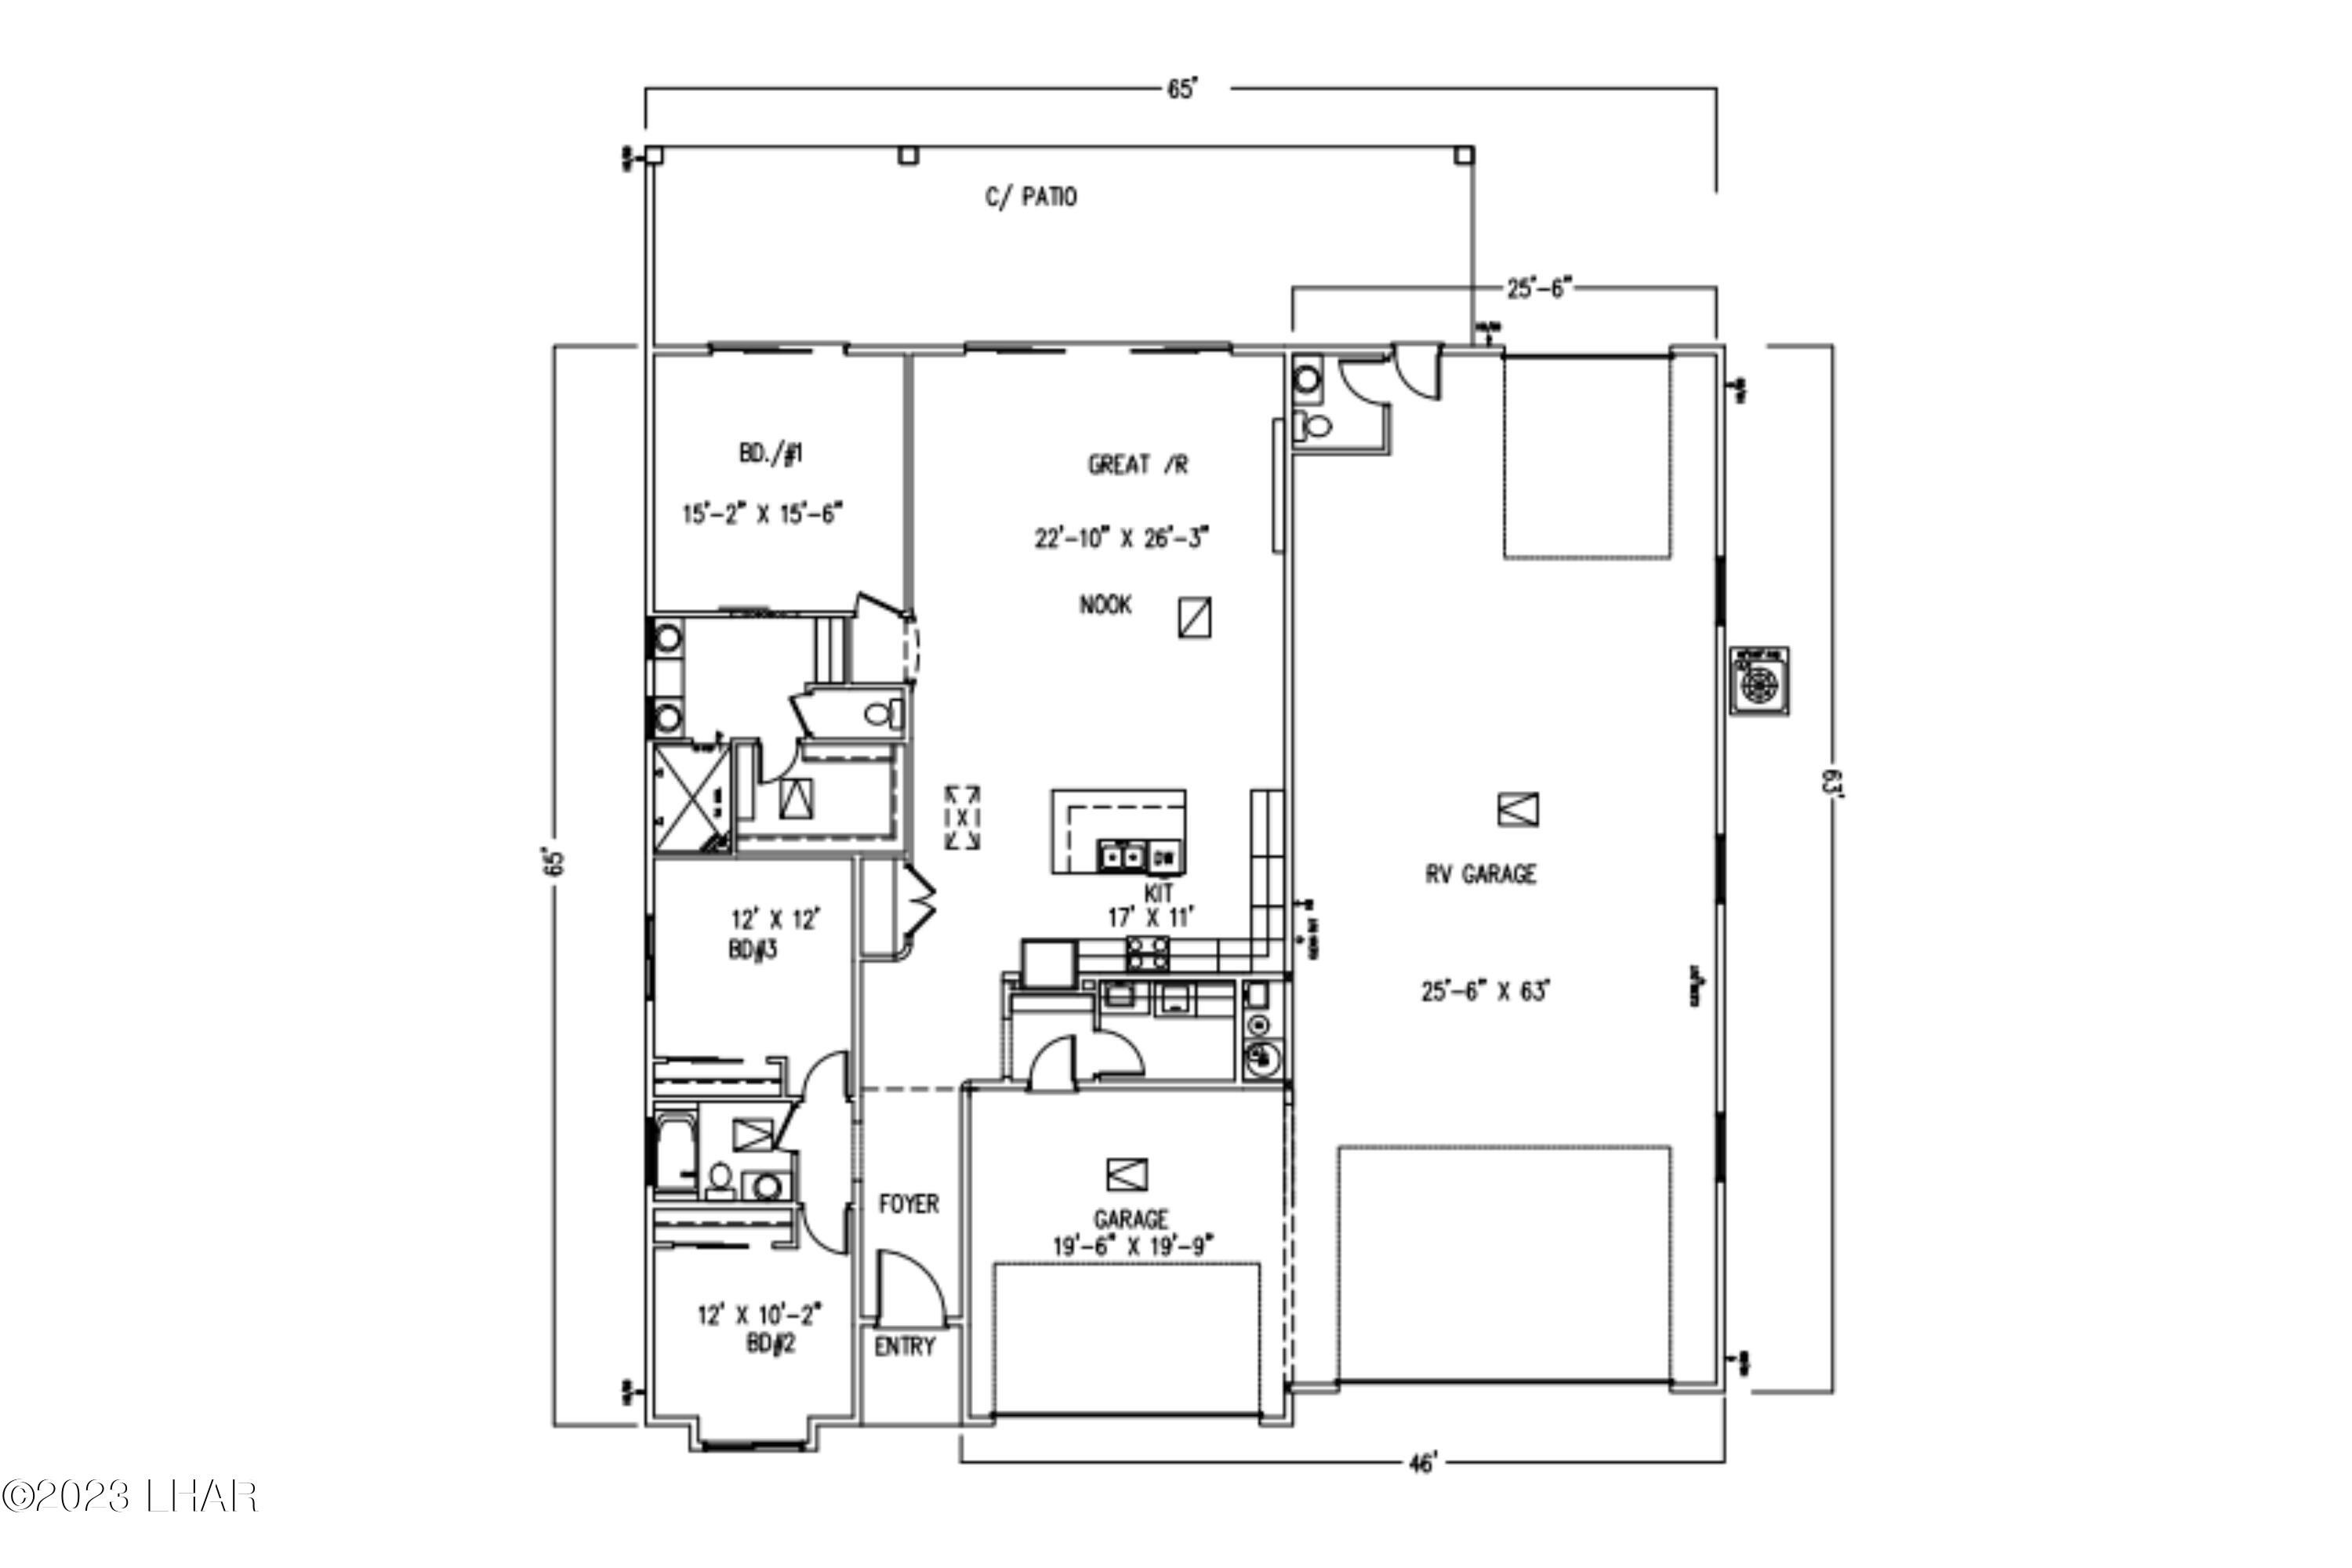 5. 3 Bedroom Sapphire On-Your-Lot Plan